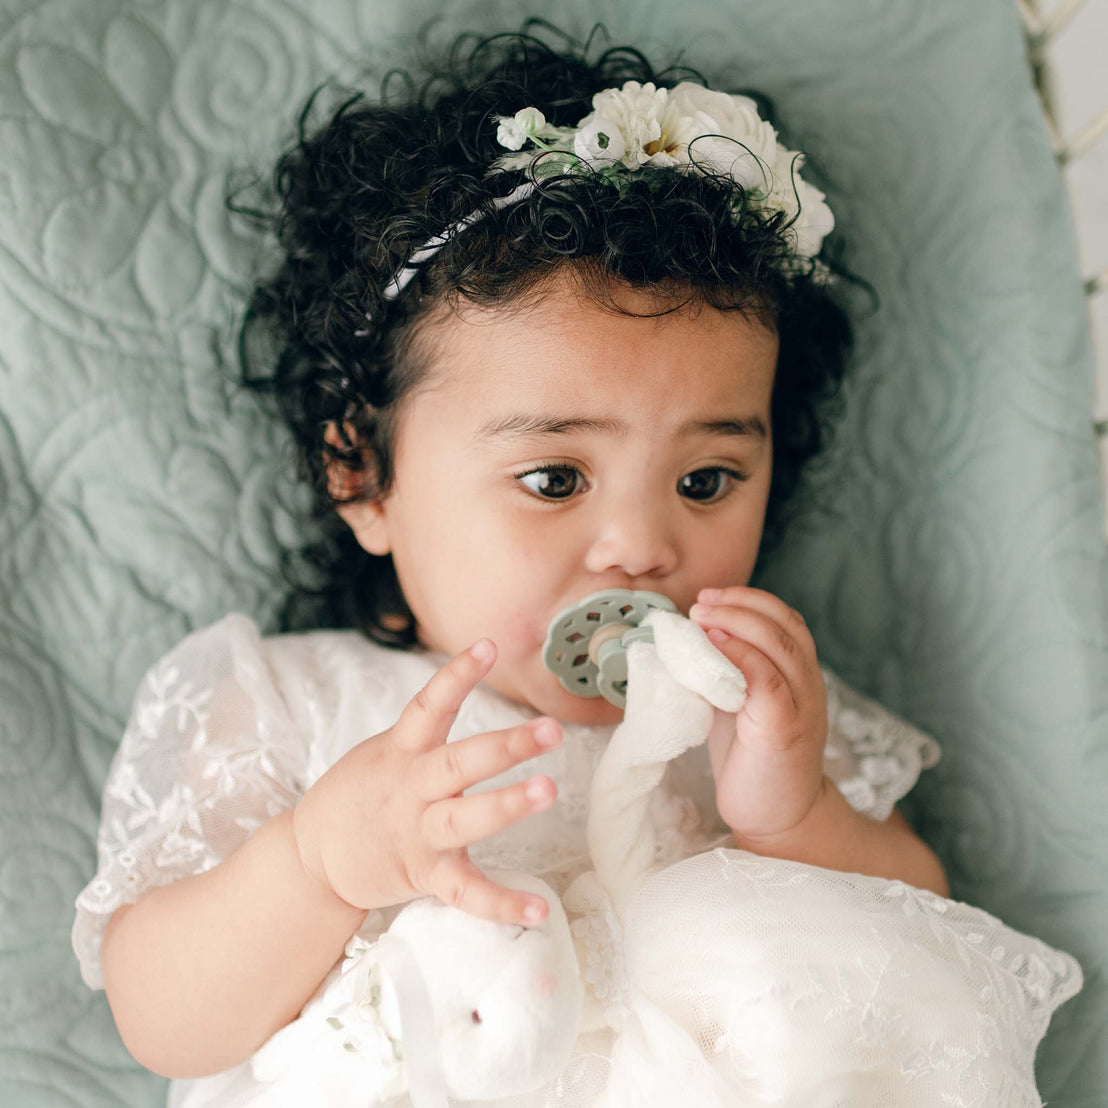 A baby with curly hair is lying on a light green quilted surface. The baby is wearing a white floral headband and a white lace dress. Holding a soft toy in one hand, the baby self-soothes using an Ella Pacifier Set | Sage & Ivory in the other, with the pacifier in their mouth.